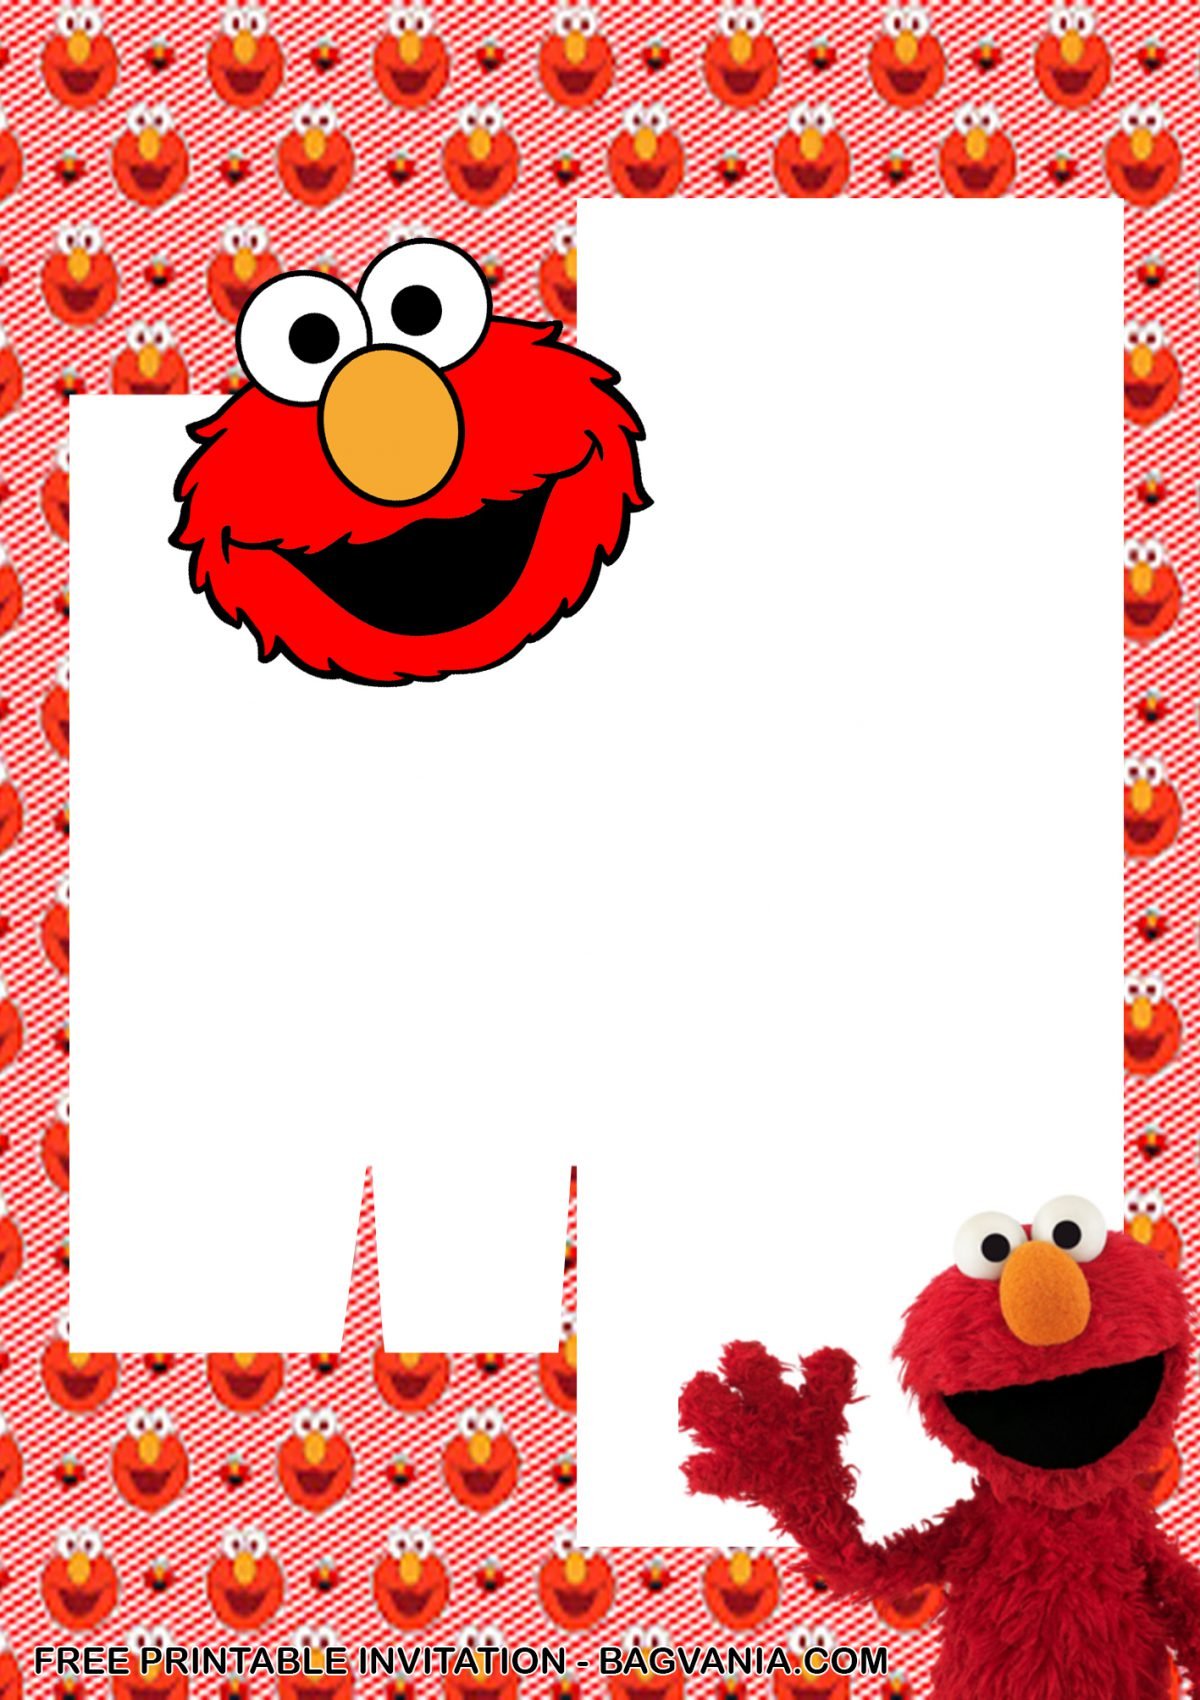 Free Printable Elmo Baby Shower Invitation Templates With Adorable Elmo Background